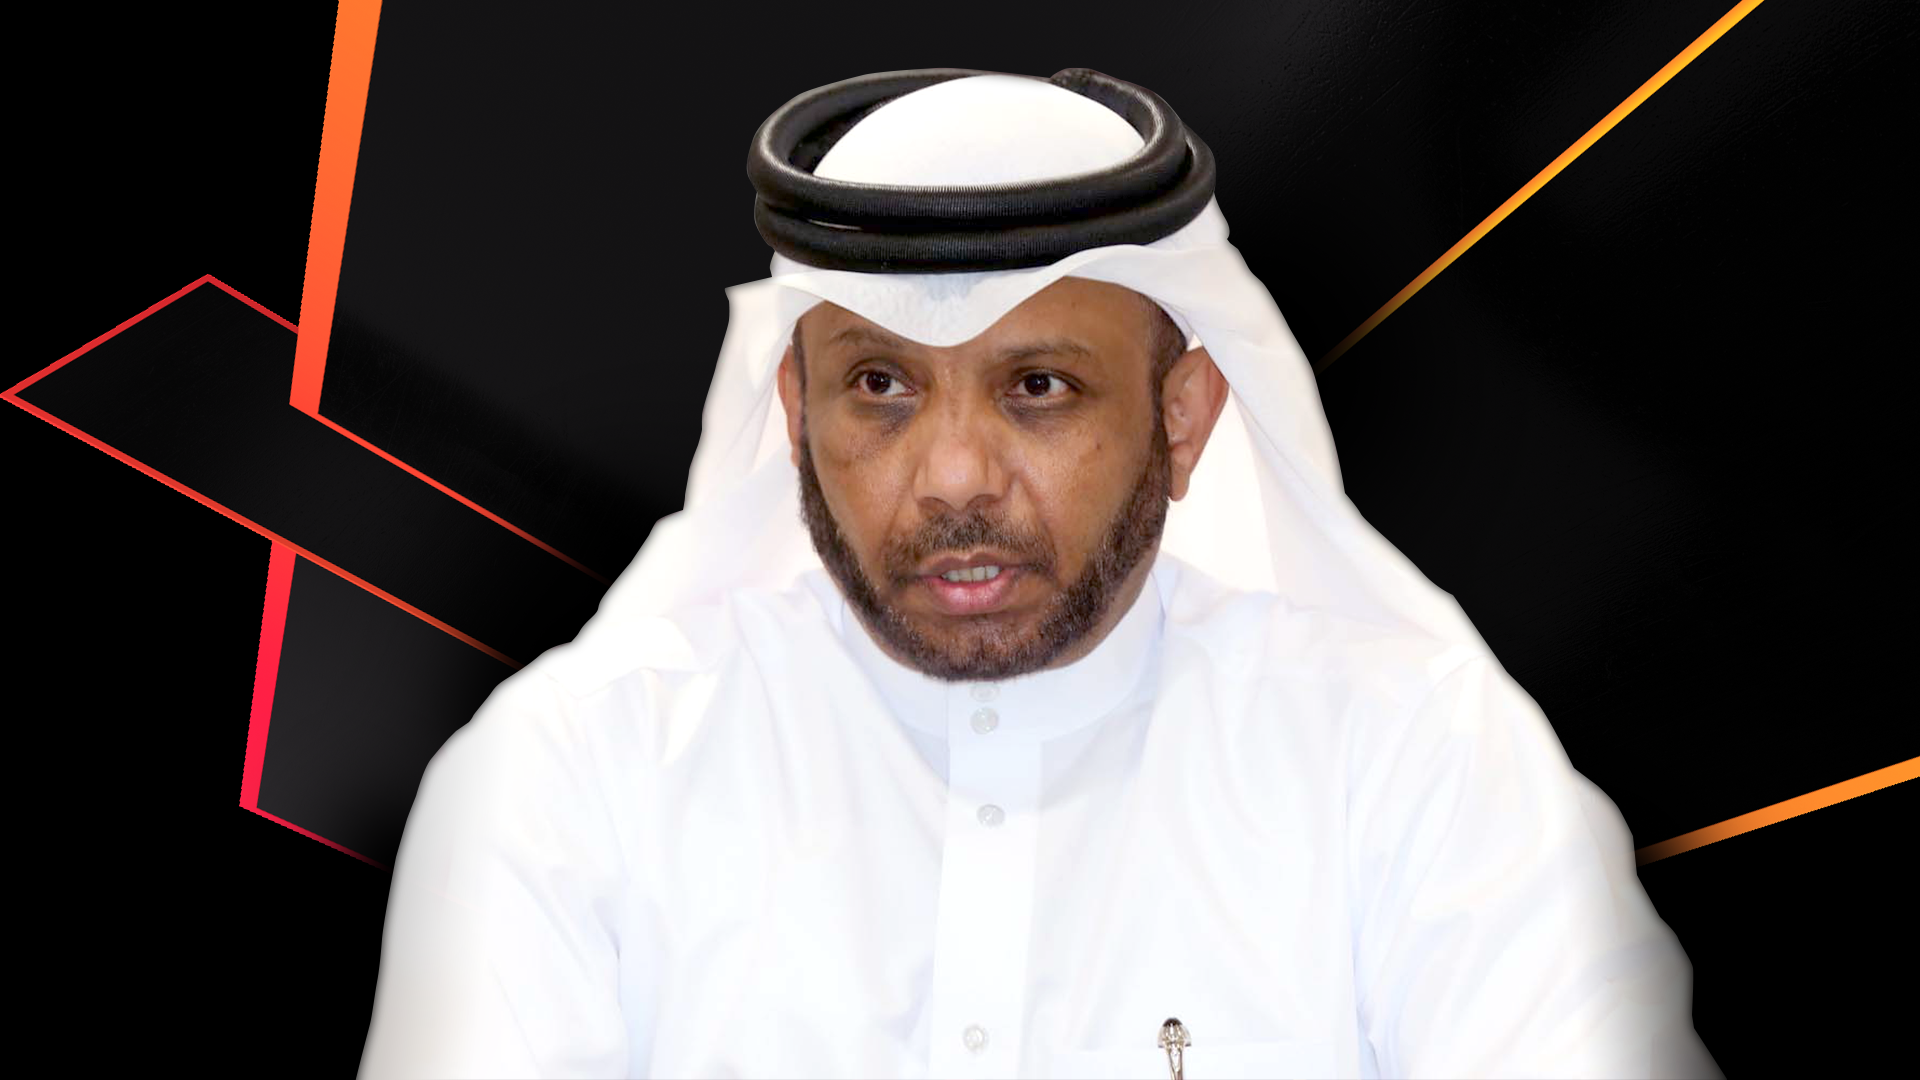 Khalil Al-Mohannadi has been reinstated as ITTF Deputy President after being removed last month ©World Table Tennis